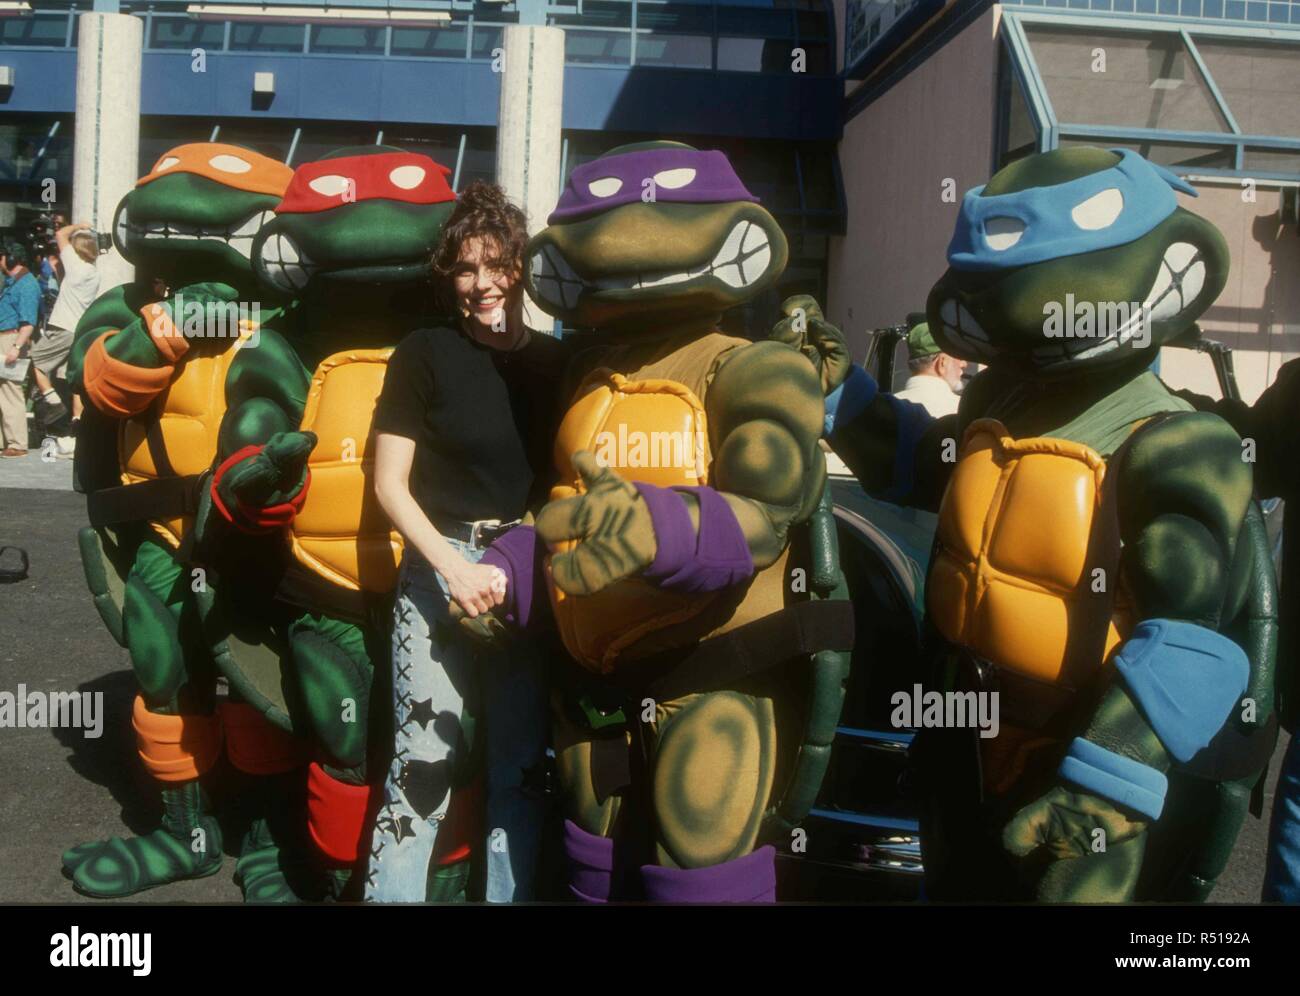 UNIVERSAL CITY, CA - MARCH 6: Actress Paige Turco attend 'Teenage Mutant Ninja Turtles III' Premiere on March 6, 1993 at Cineplex Odeon Cinema in Universal City, California. Photo by Barry King/Alamy Stock Photo Stock Photo